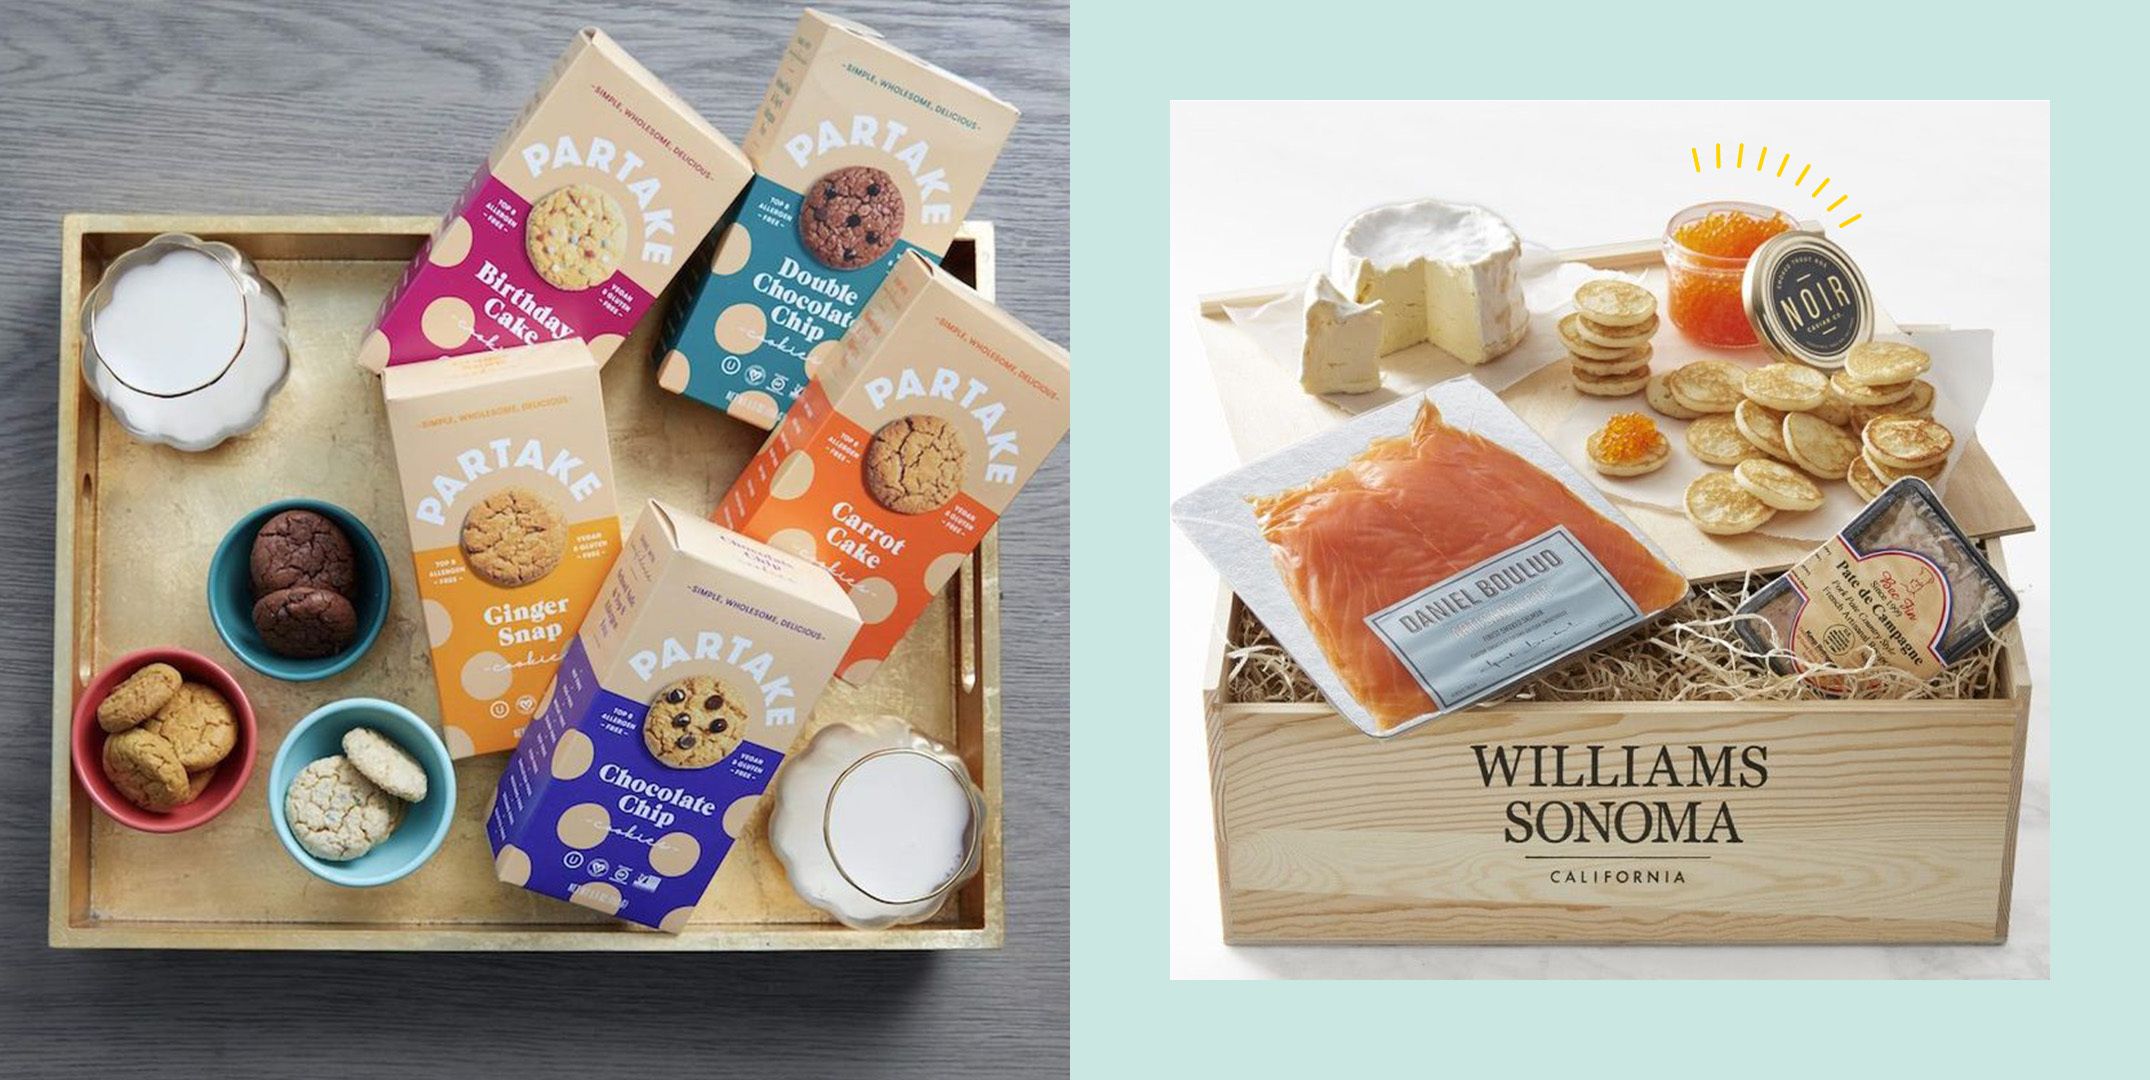 Gourmet Food Gifts by Mail: Luxury